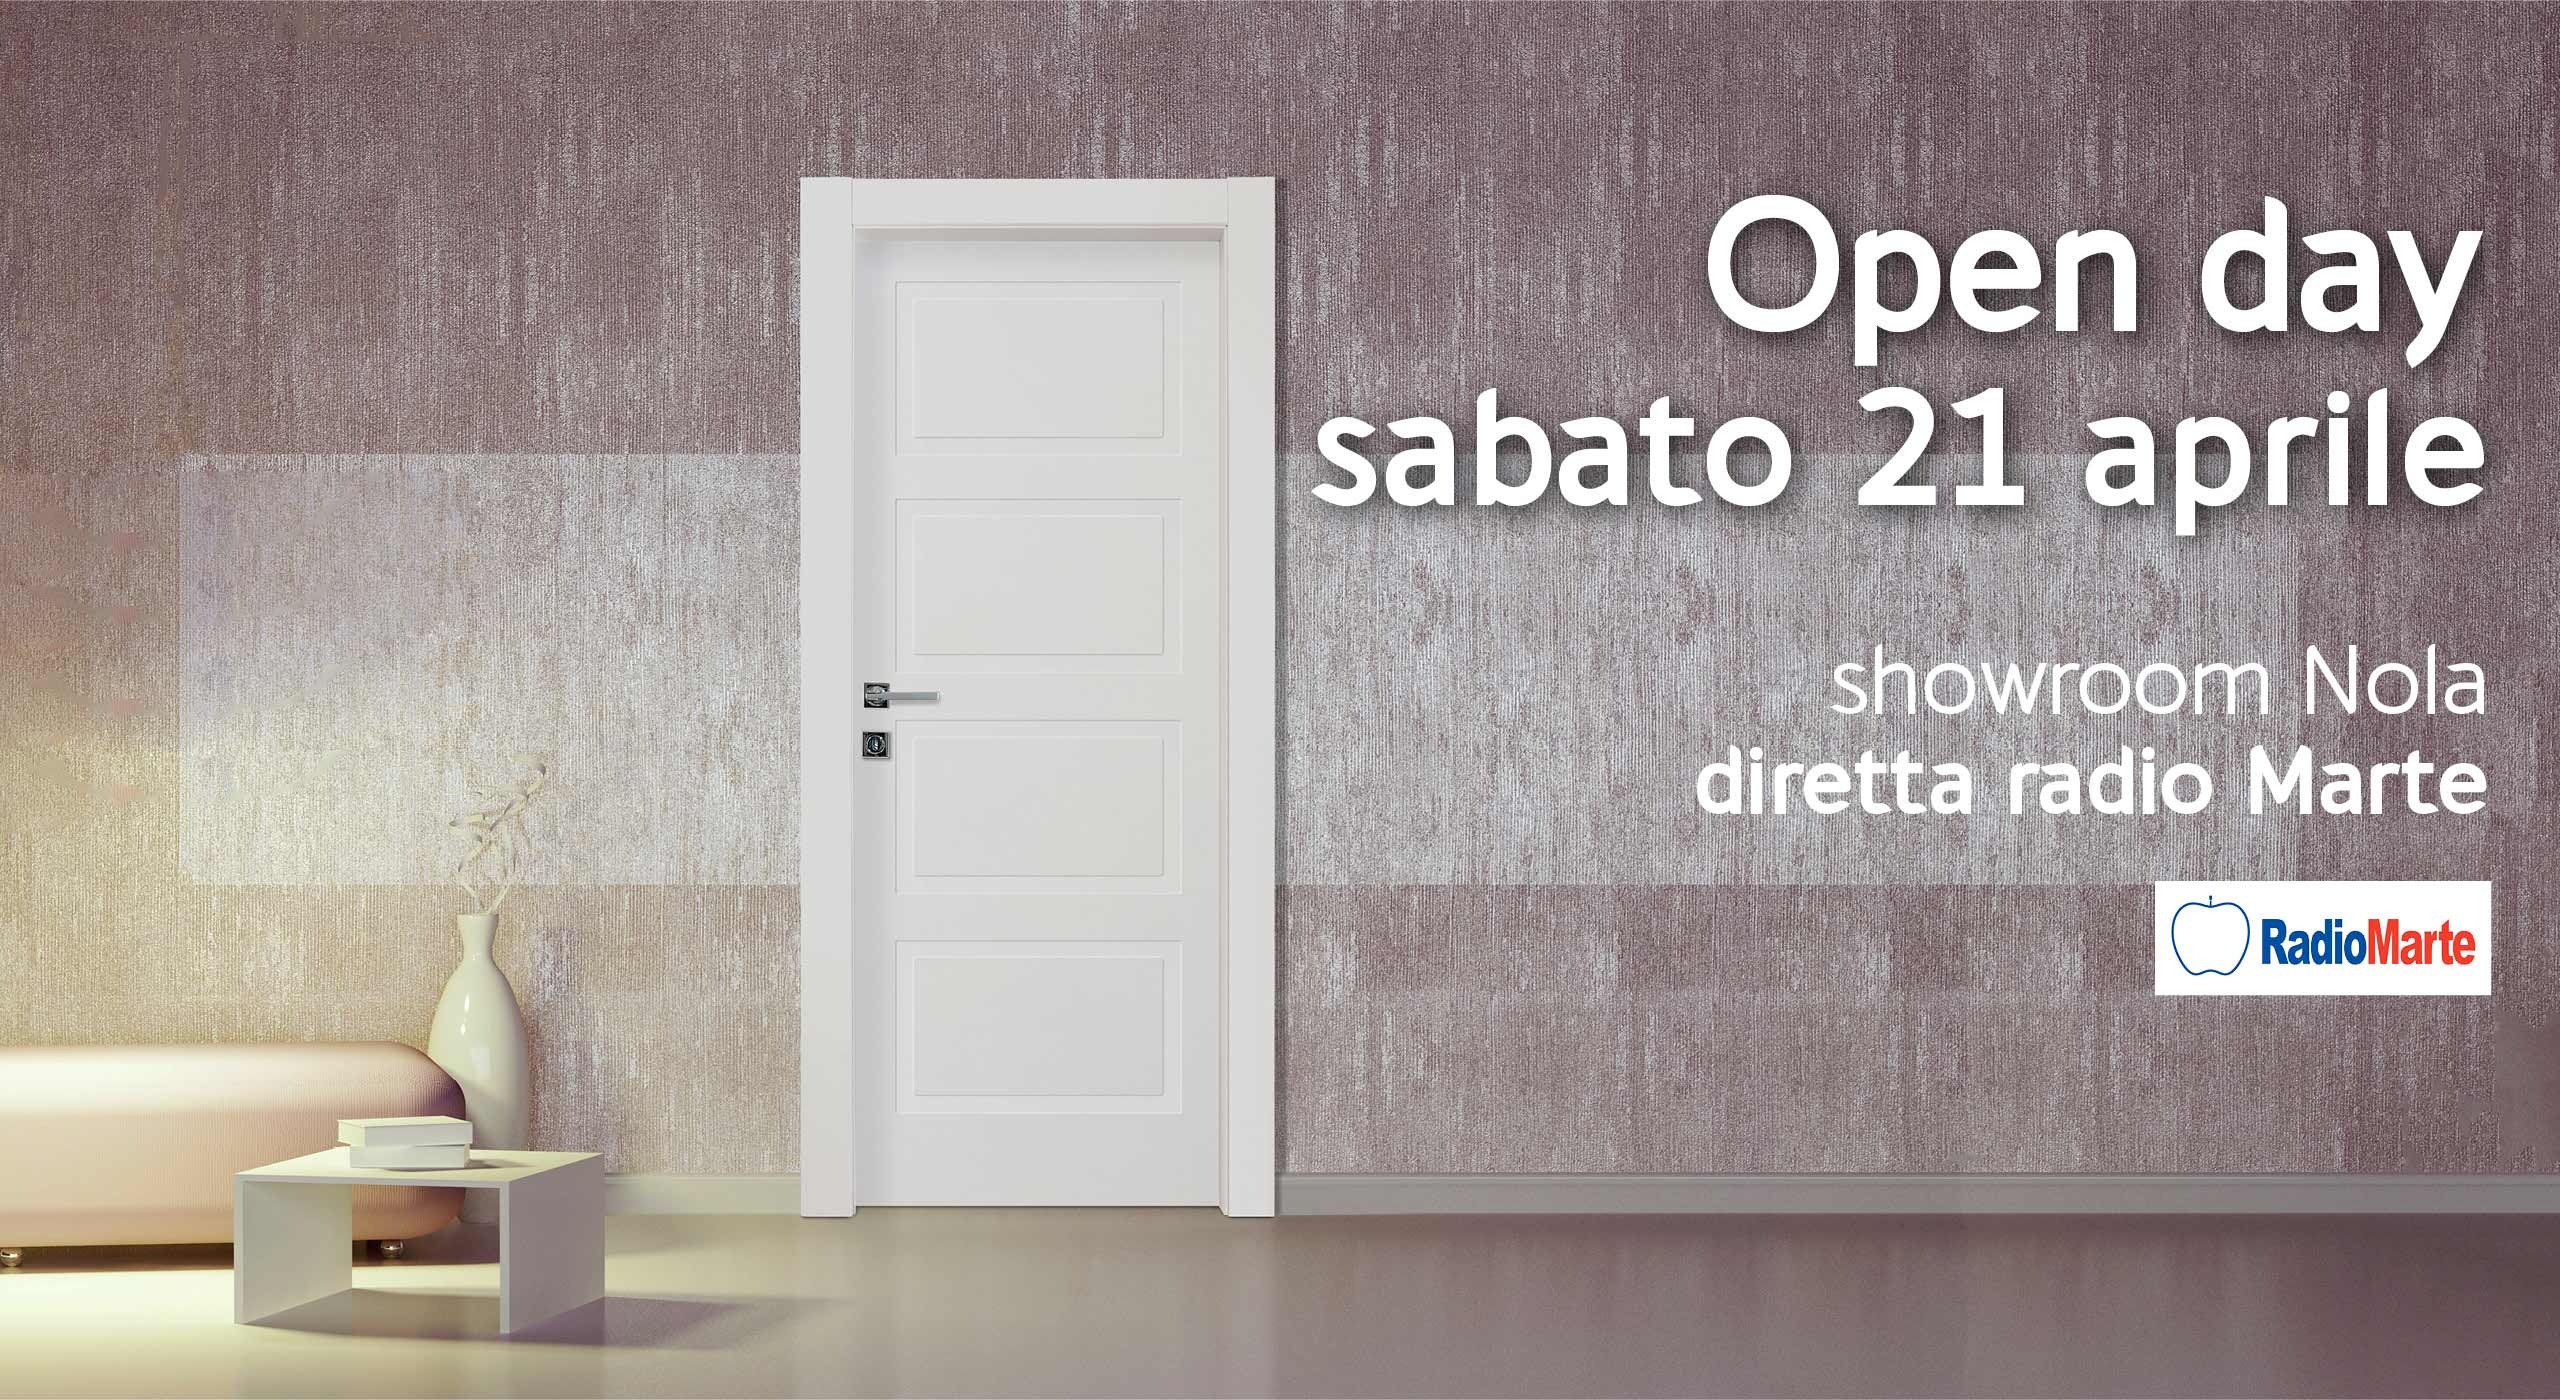 Openday 21 aprile